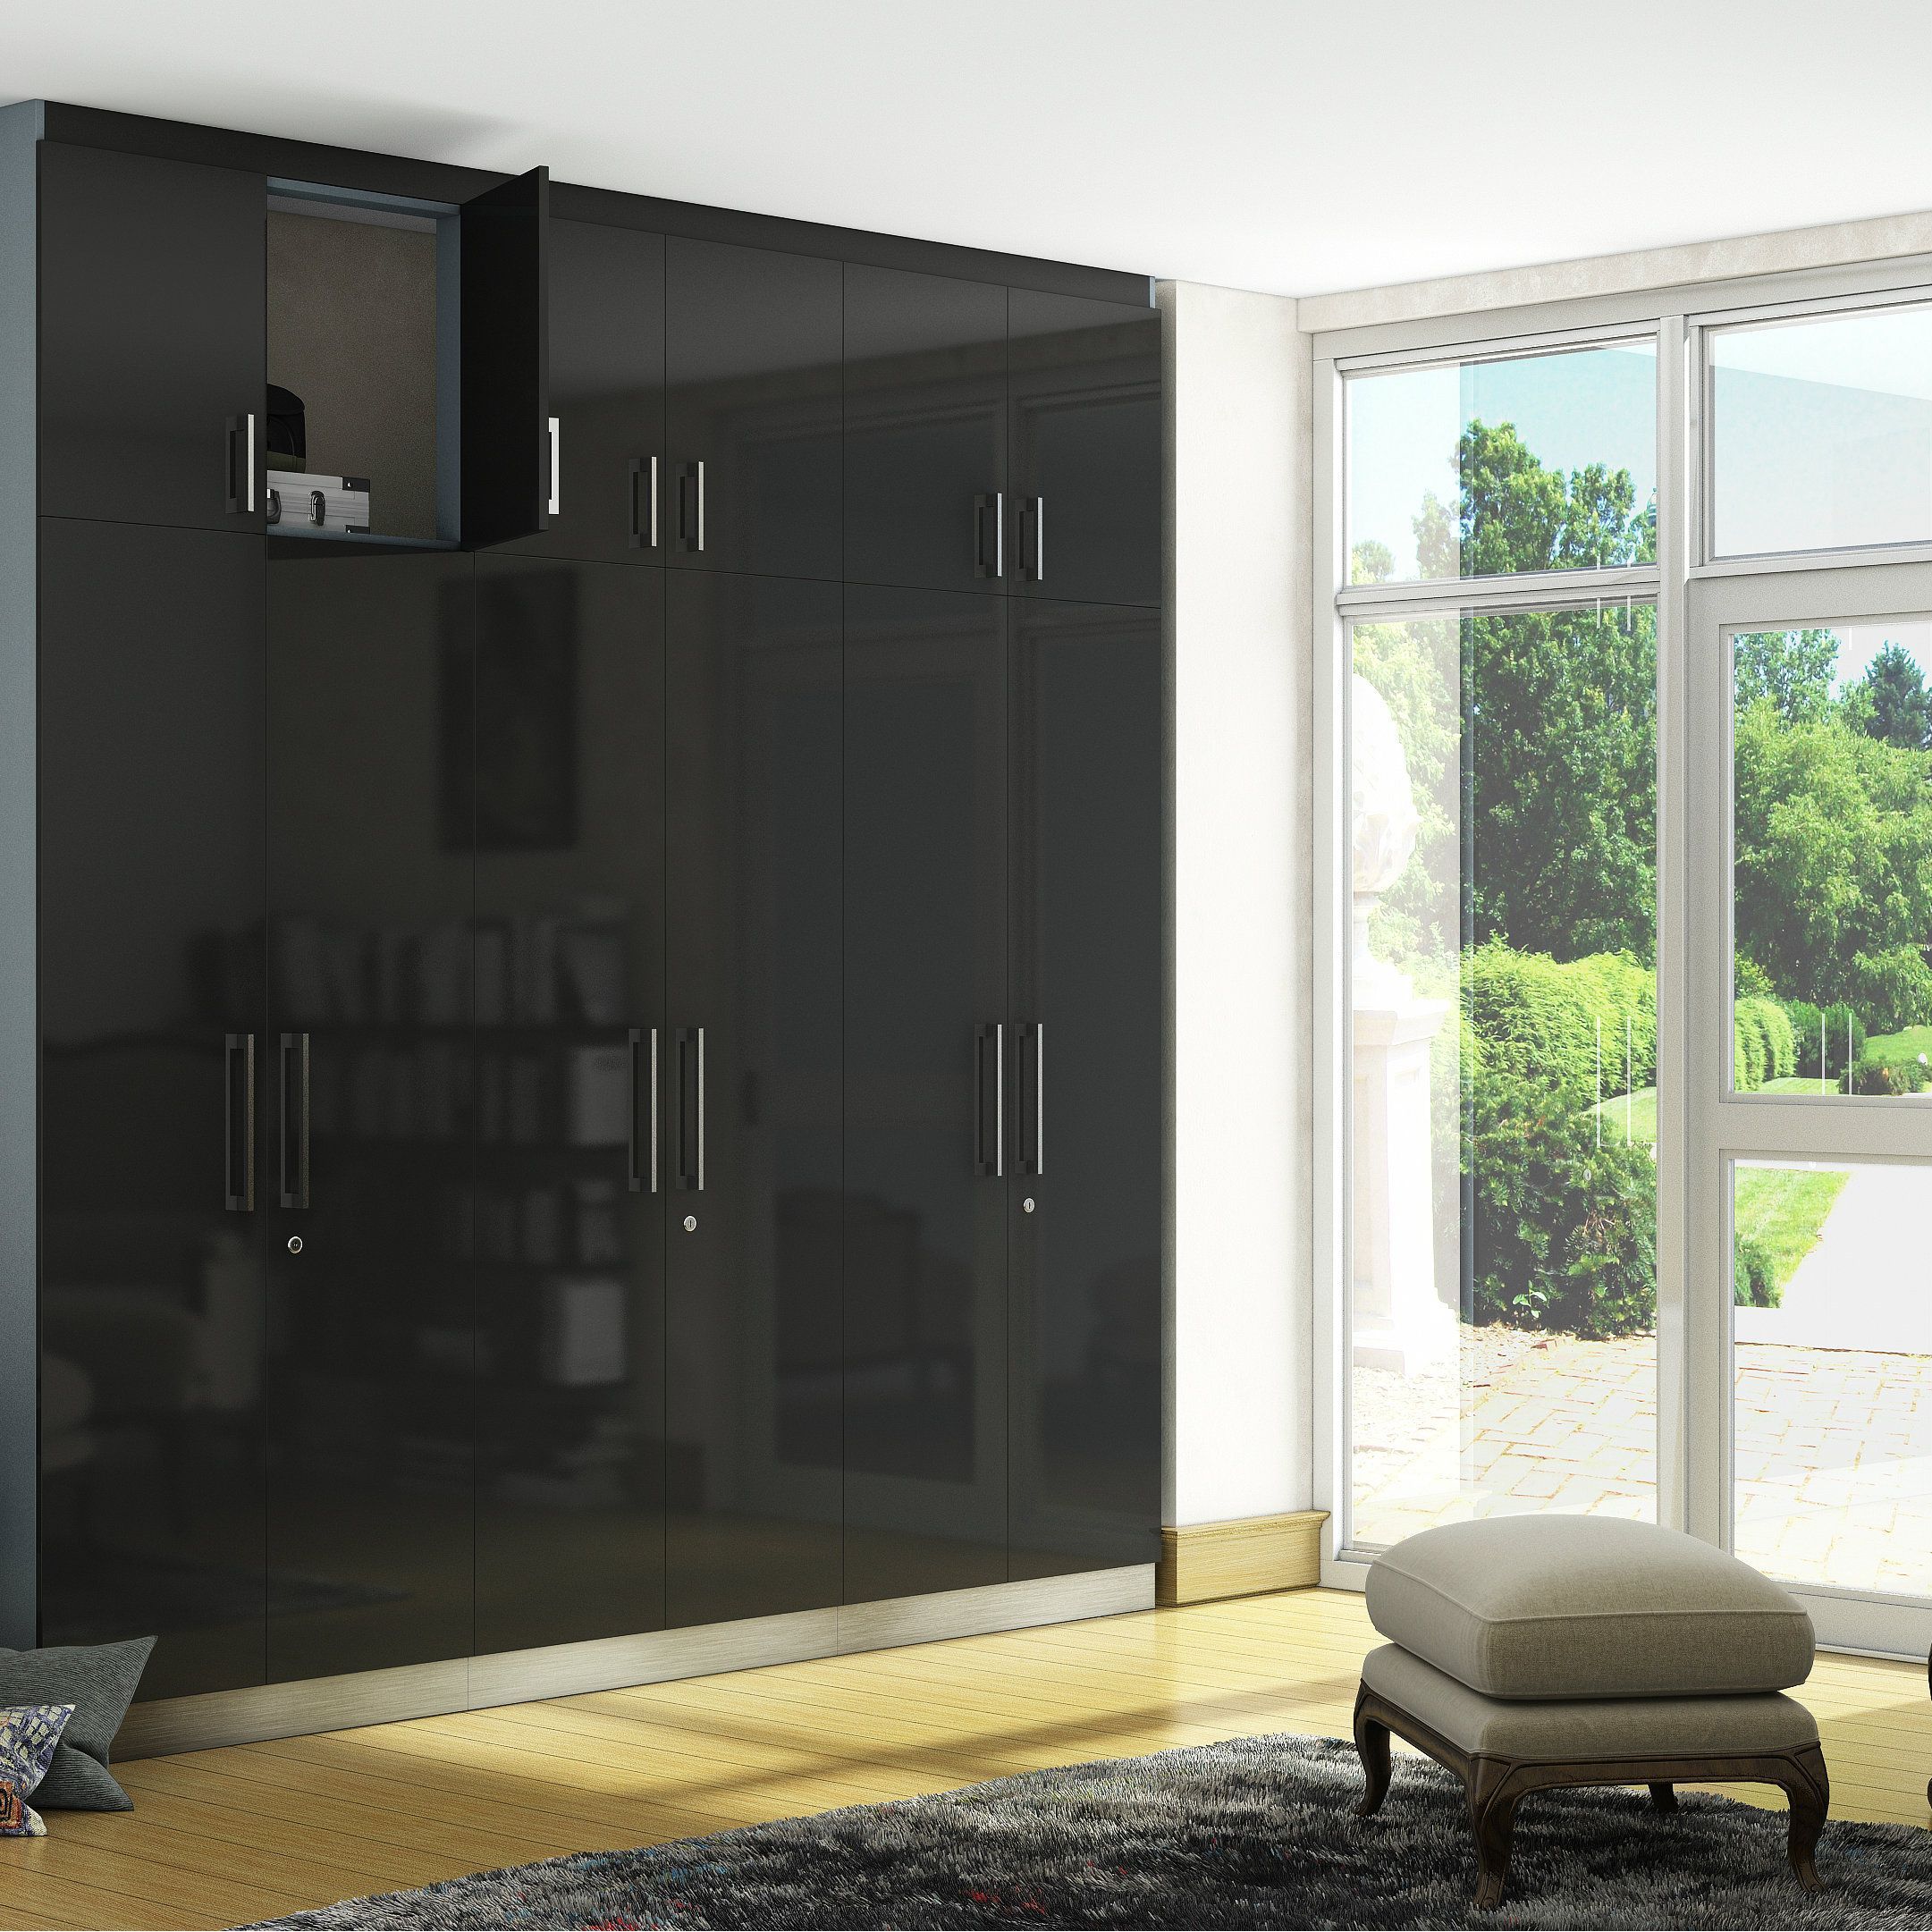 A Glossy Black Wardrobe That Is Every Bit As Impressive And Functional |  Wardrobe Design, Furniture Design, Grey Wardrobe Intended For High Gloss Black Wardrobes (View 7 of 15)